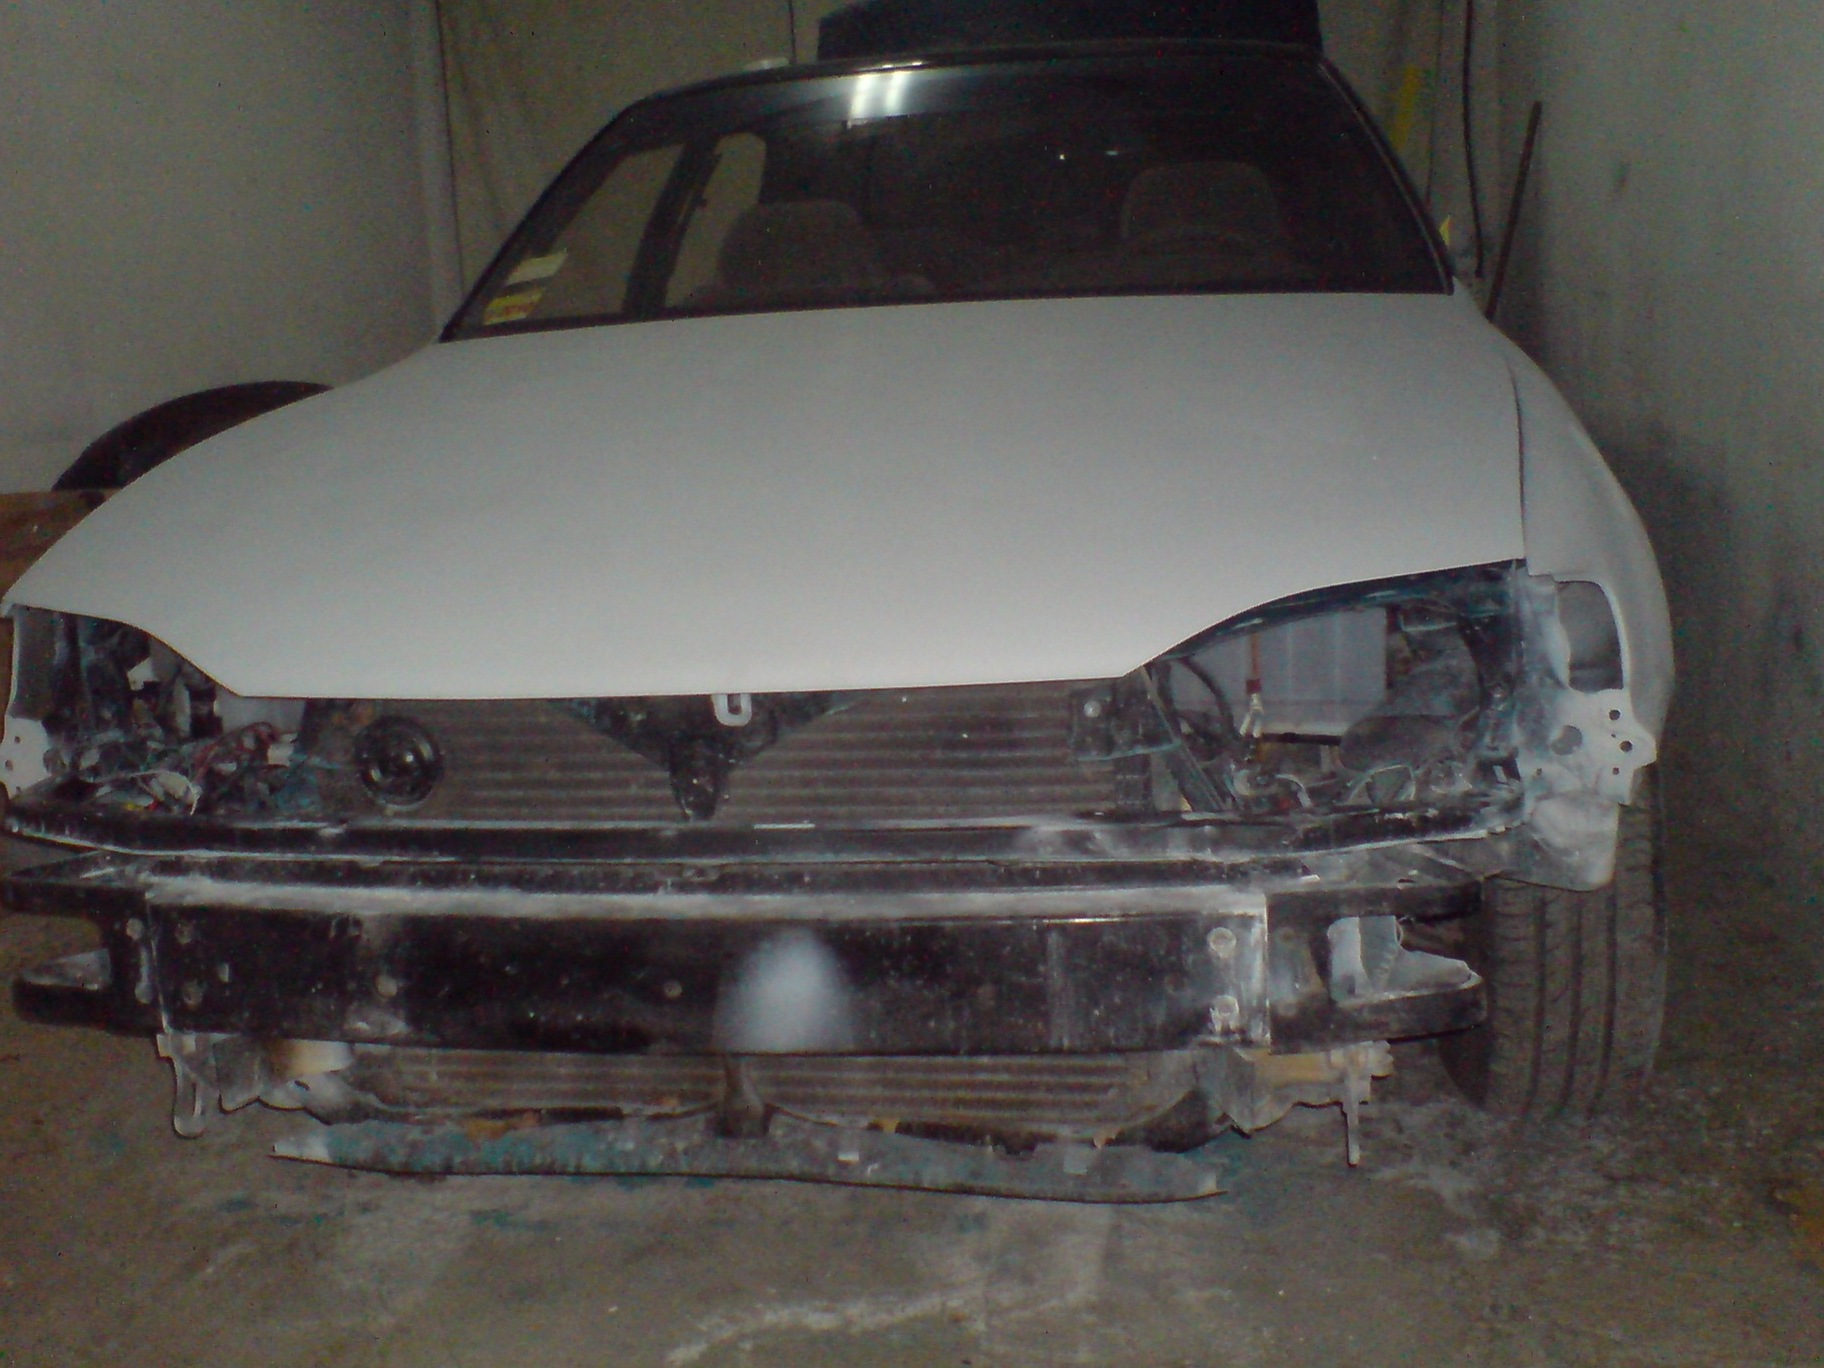 Complete disassembly assembly and painting  - Toyota Camry 22L 1993